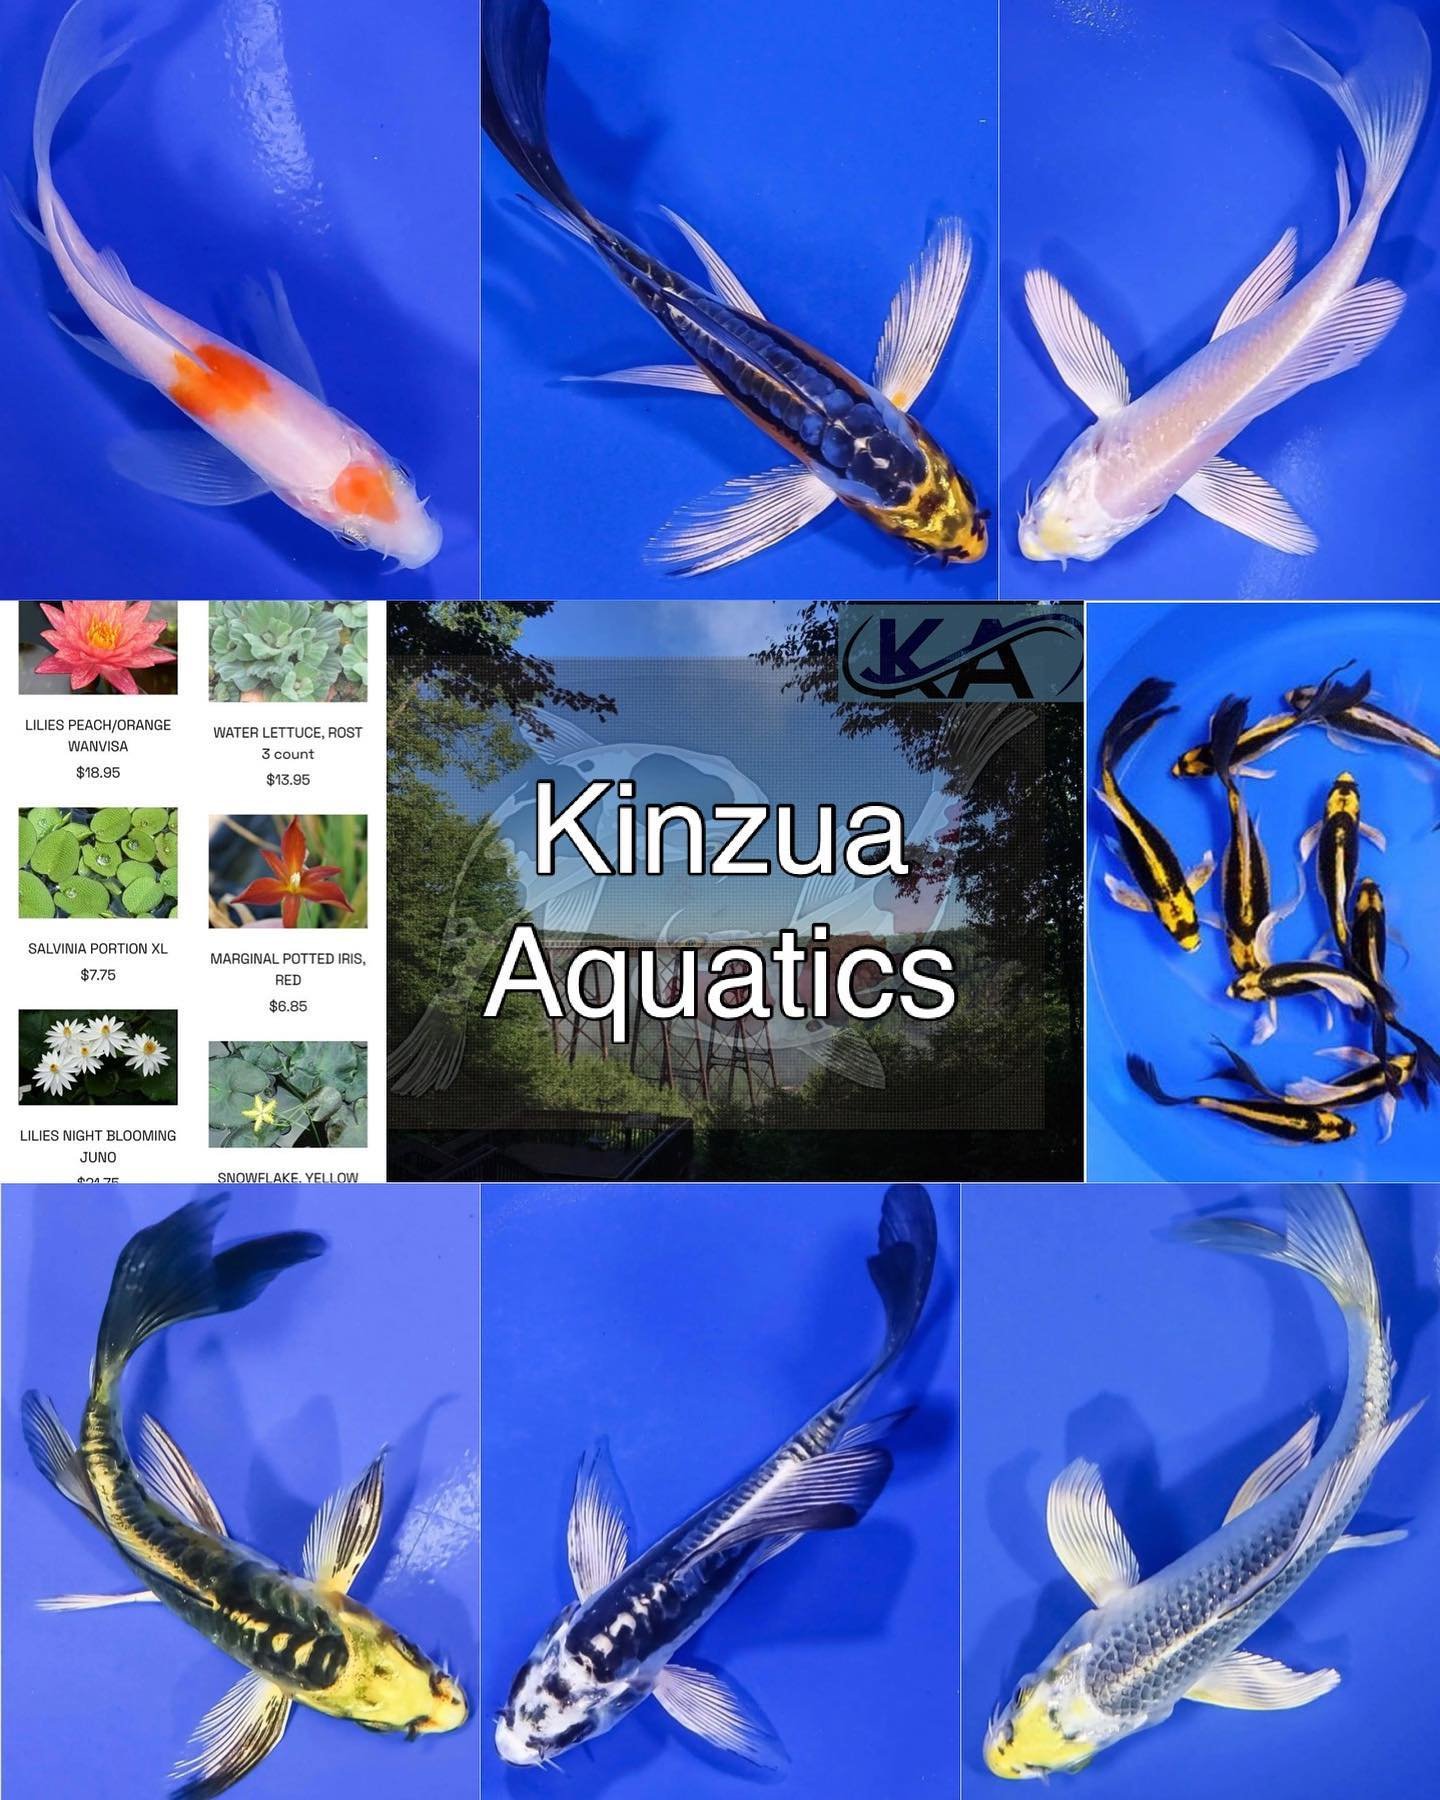 For our first vendor spotlight we have Kinzua Aquatics! 

They will have two large koi ponds full of various sizes of koi, butterfly koi, &amp; specialty koi. They will also have a variety of fresh water fish, tropical fish, aquatic plants, and pond 